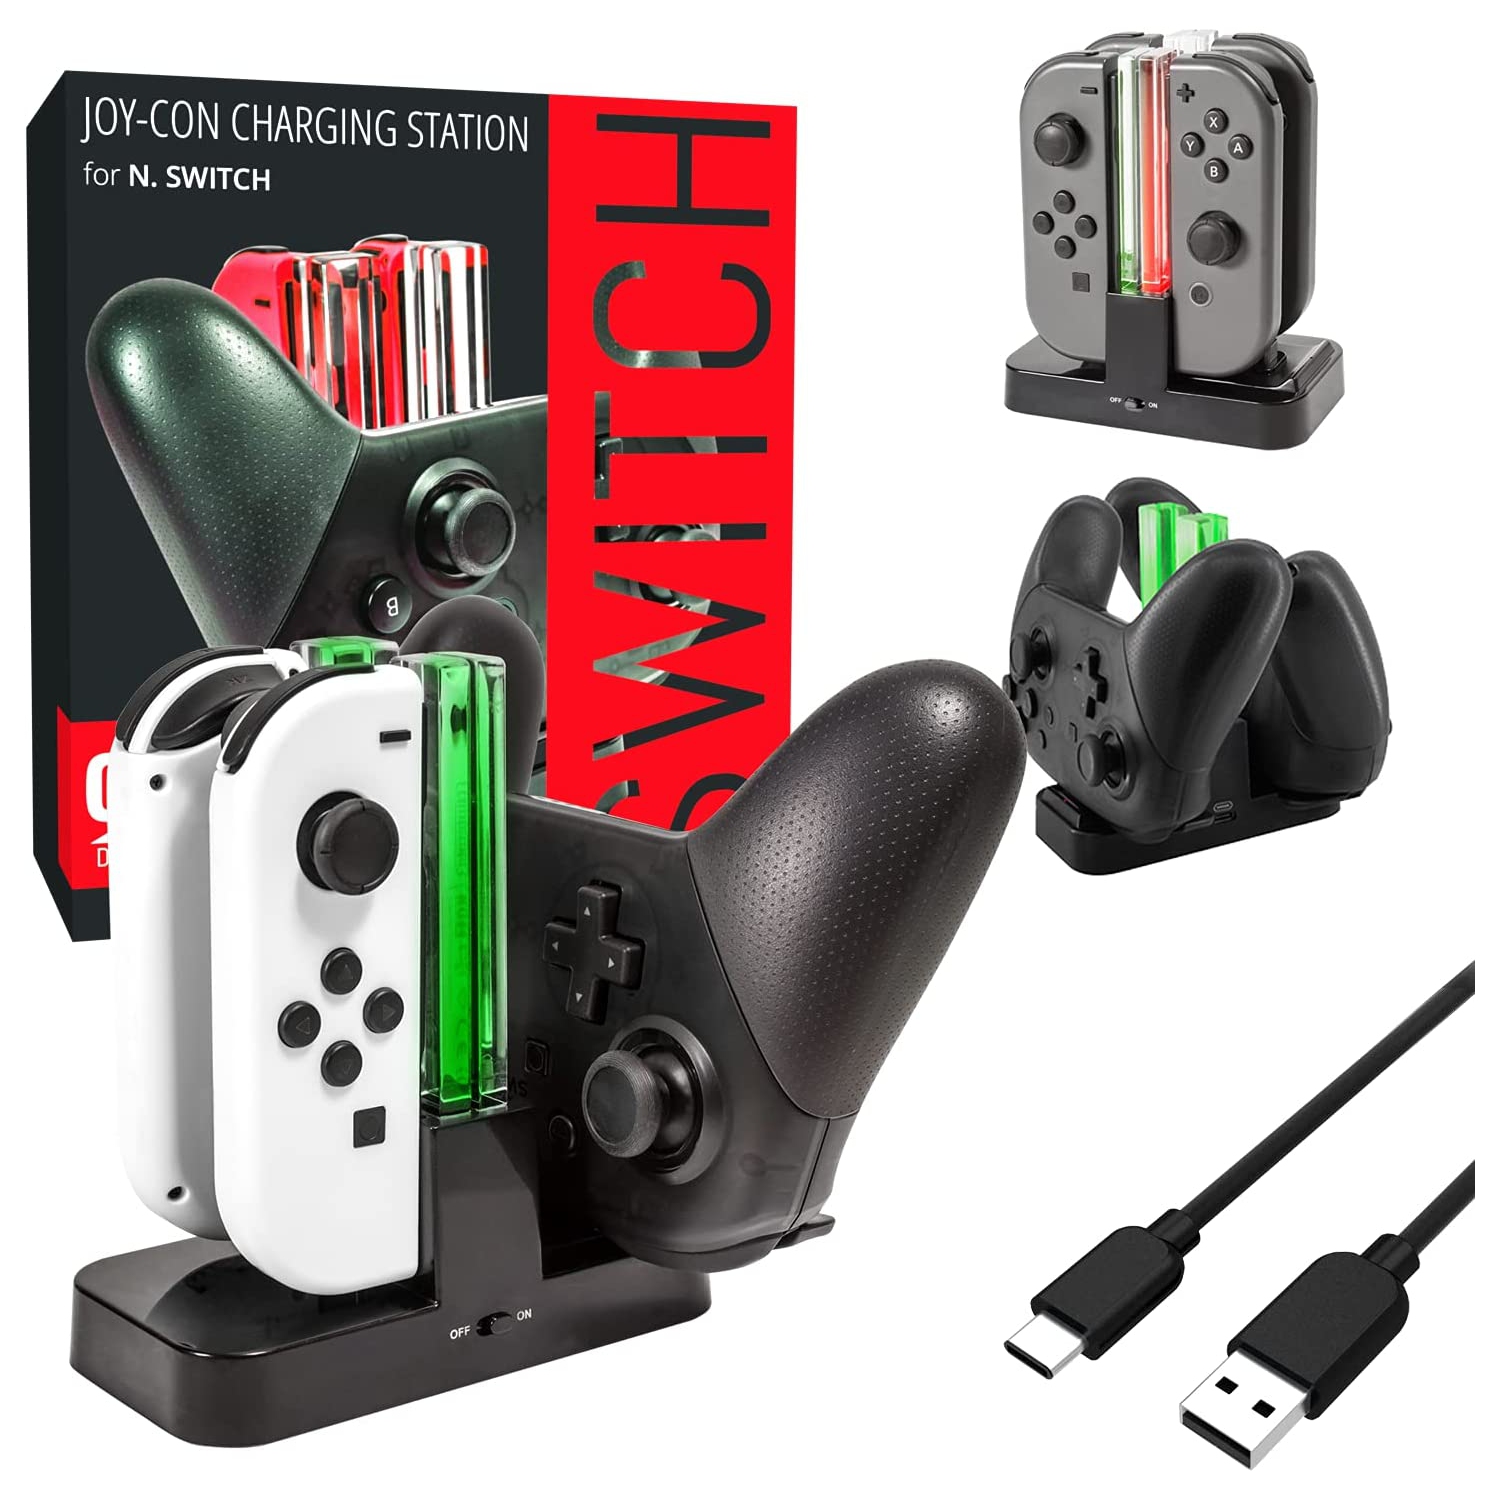 Switch Pro Controller Dock, [with Individual Charge LED Indicator Lights & USB TypeC Cable] for Charging up to Four Nintendo Switch Joy-Cons (or 1 Pro Control